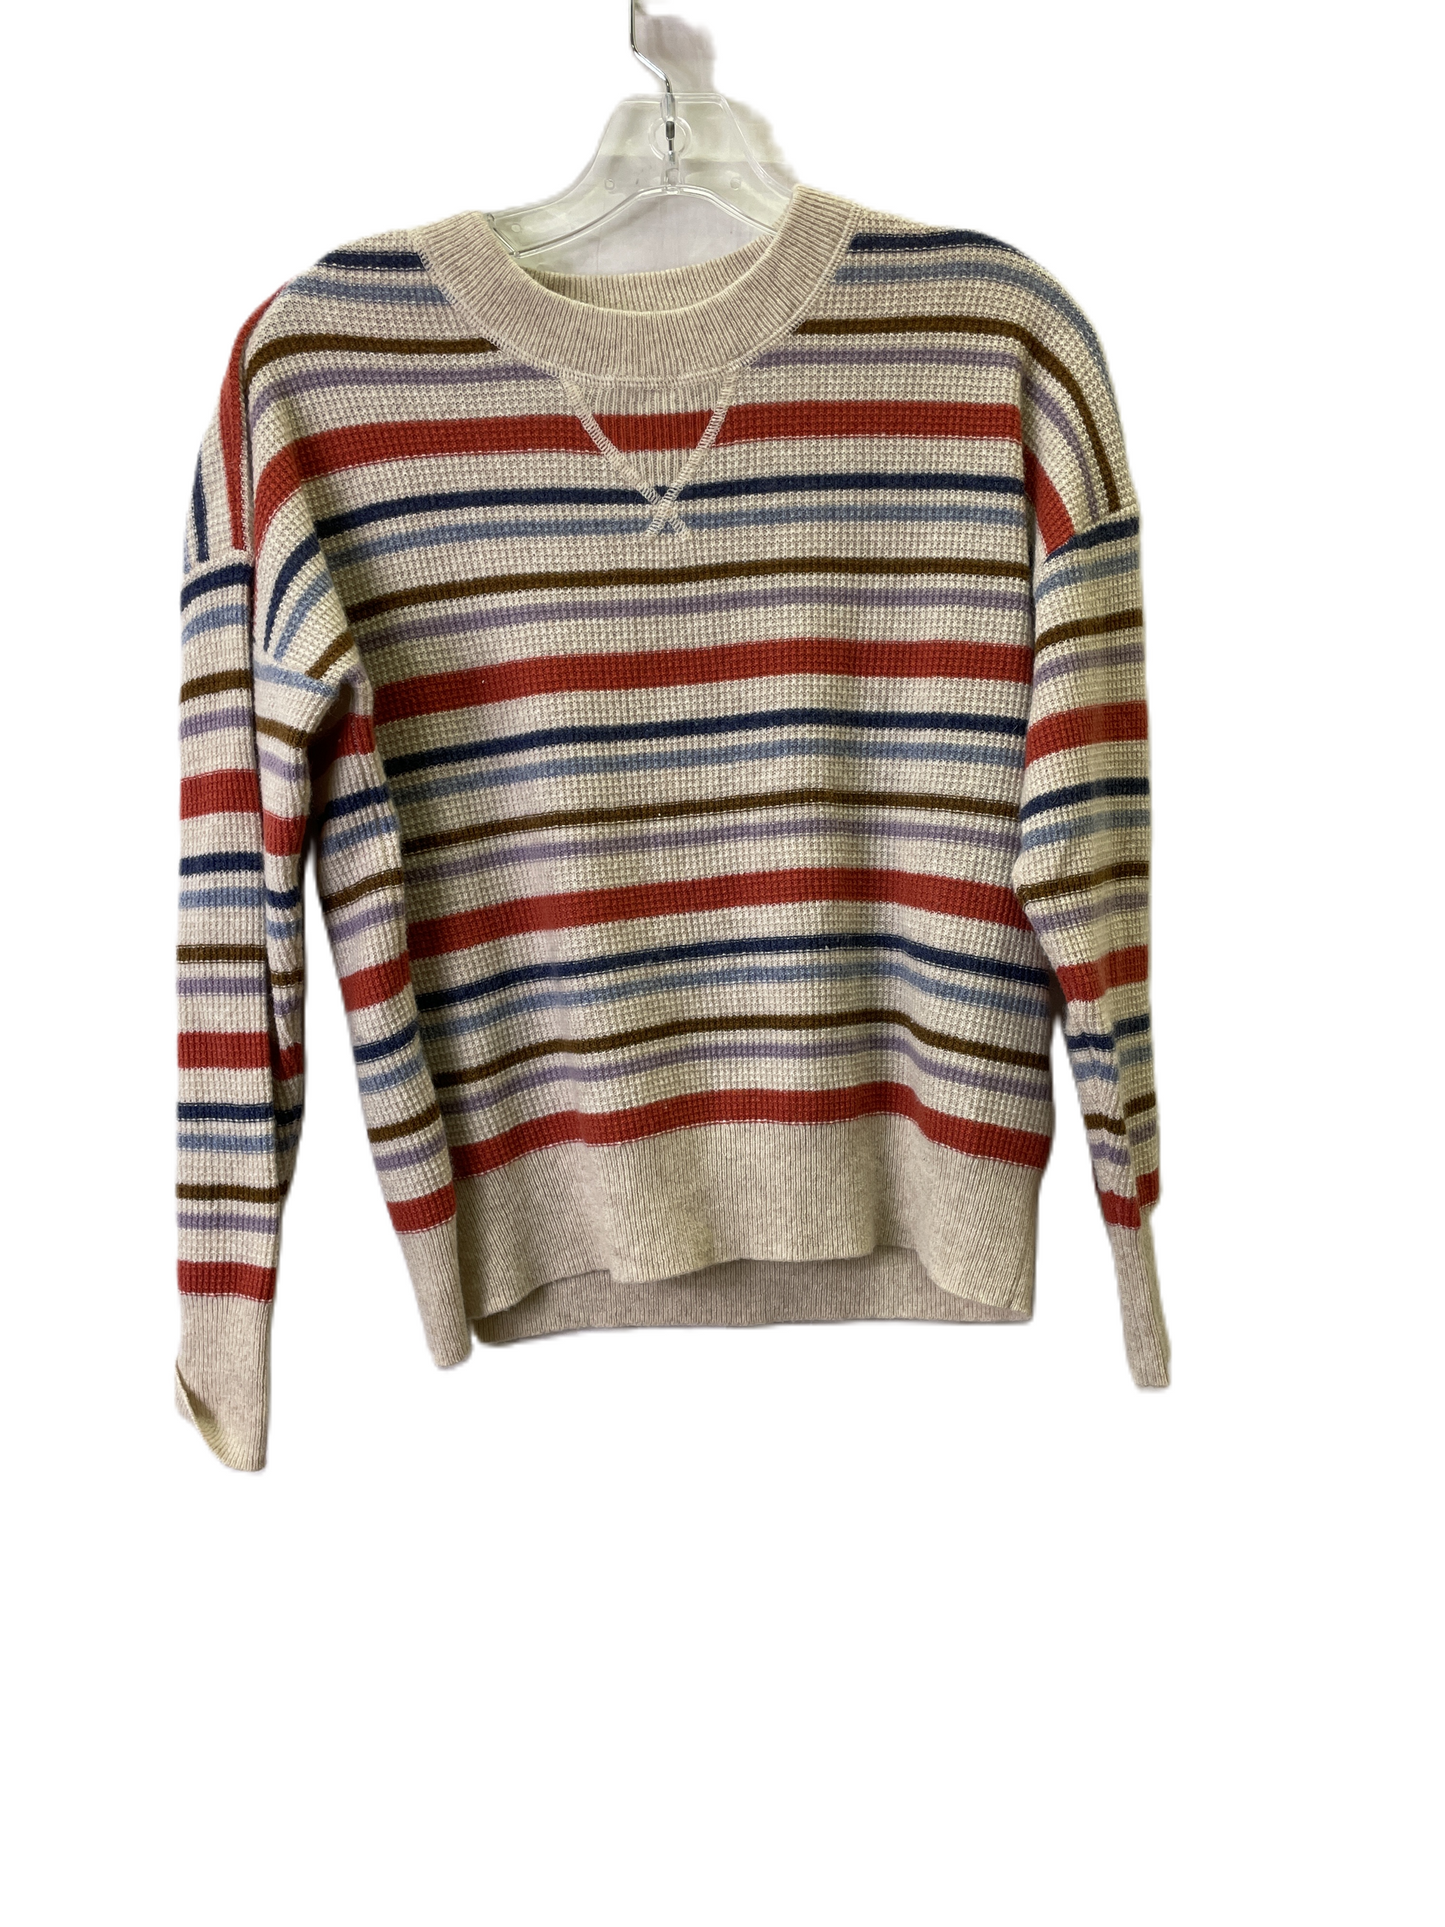 Beige Sweater By Madewell, Size: S